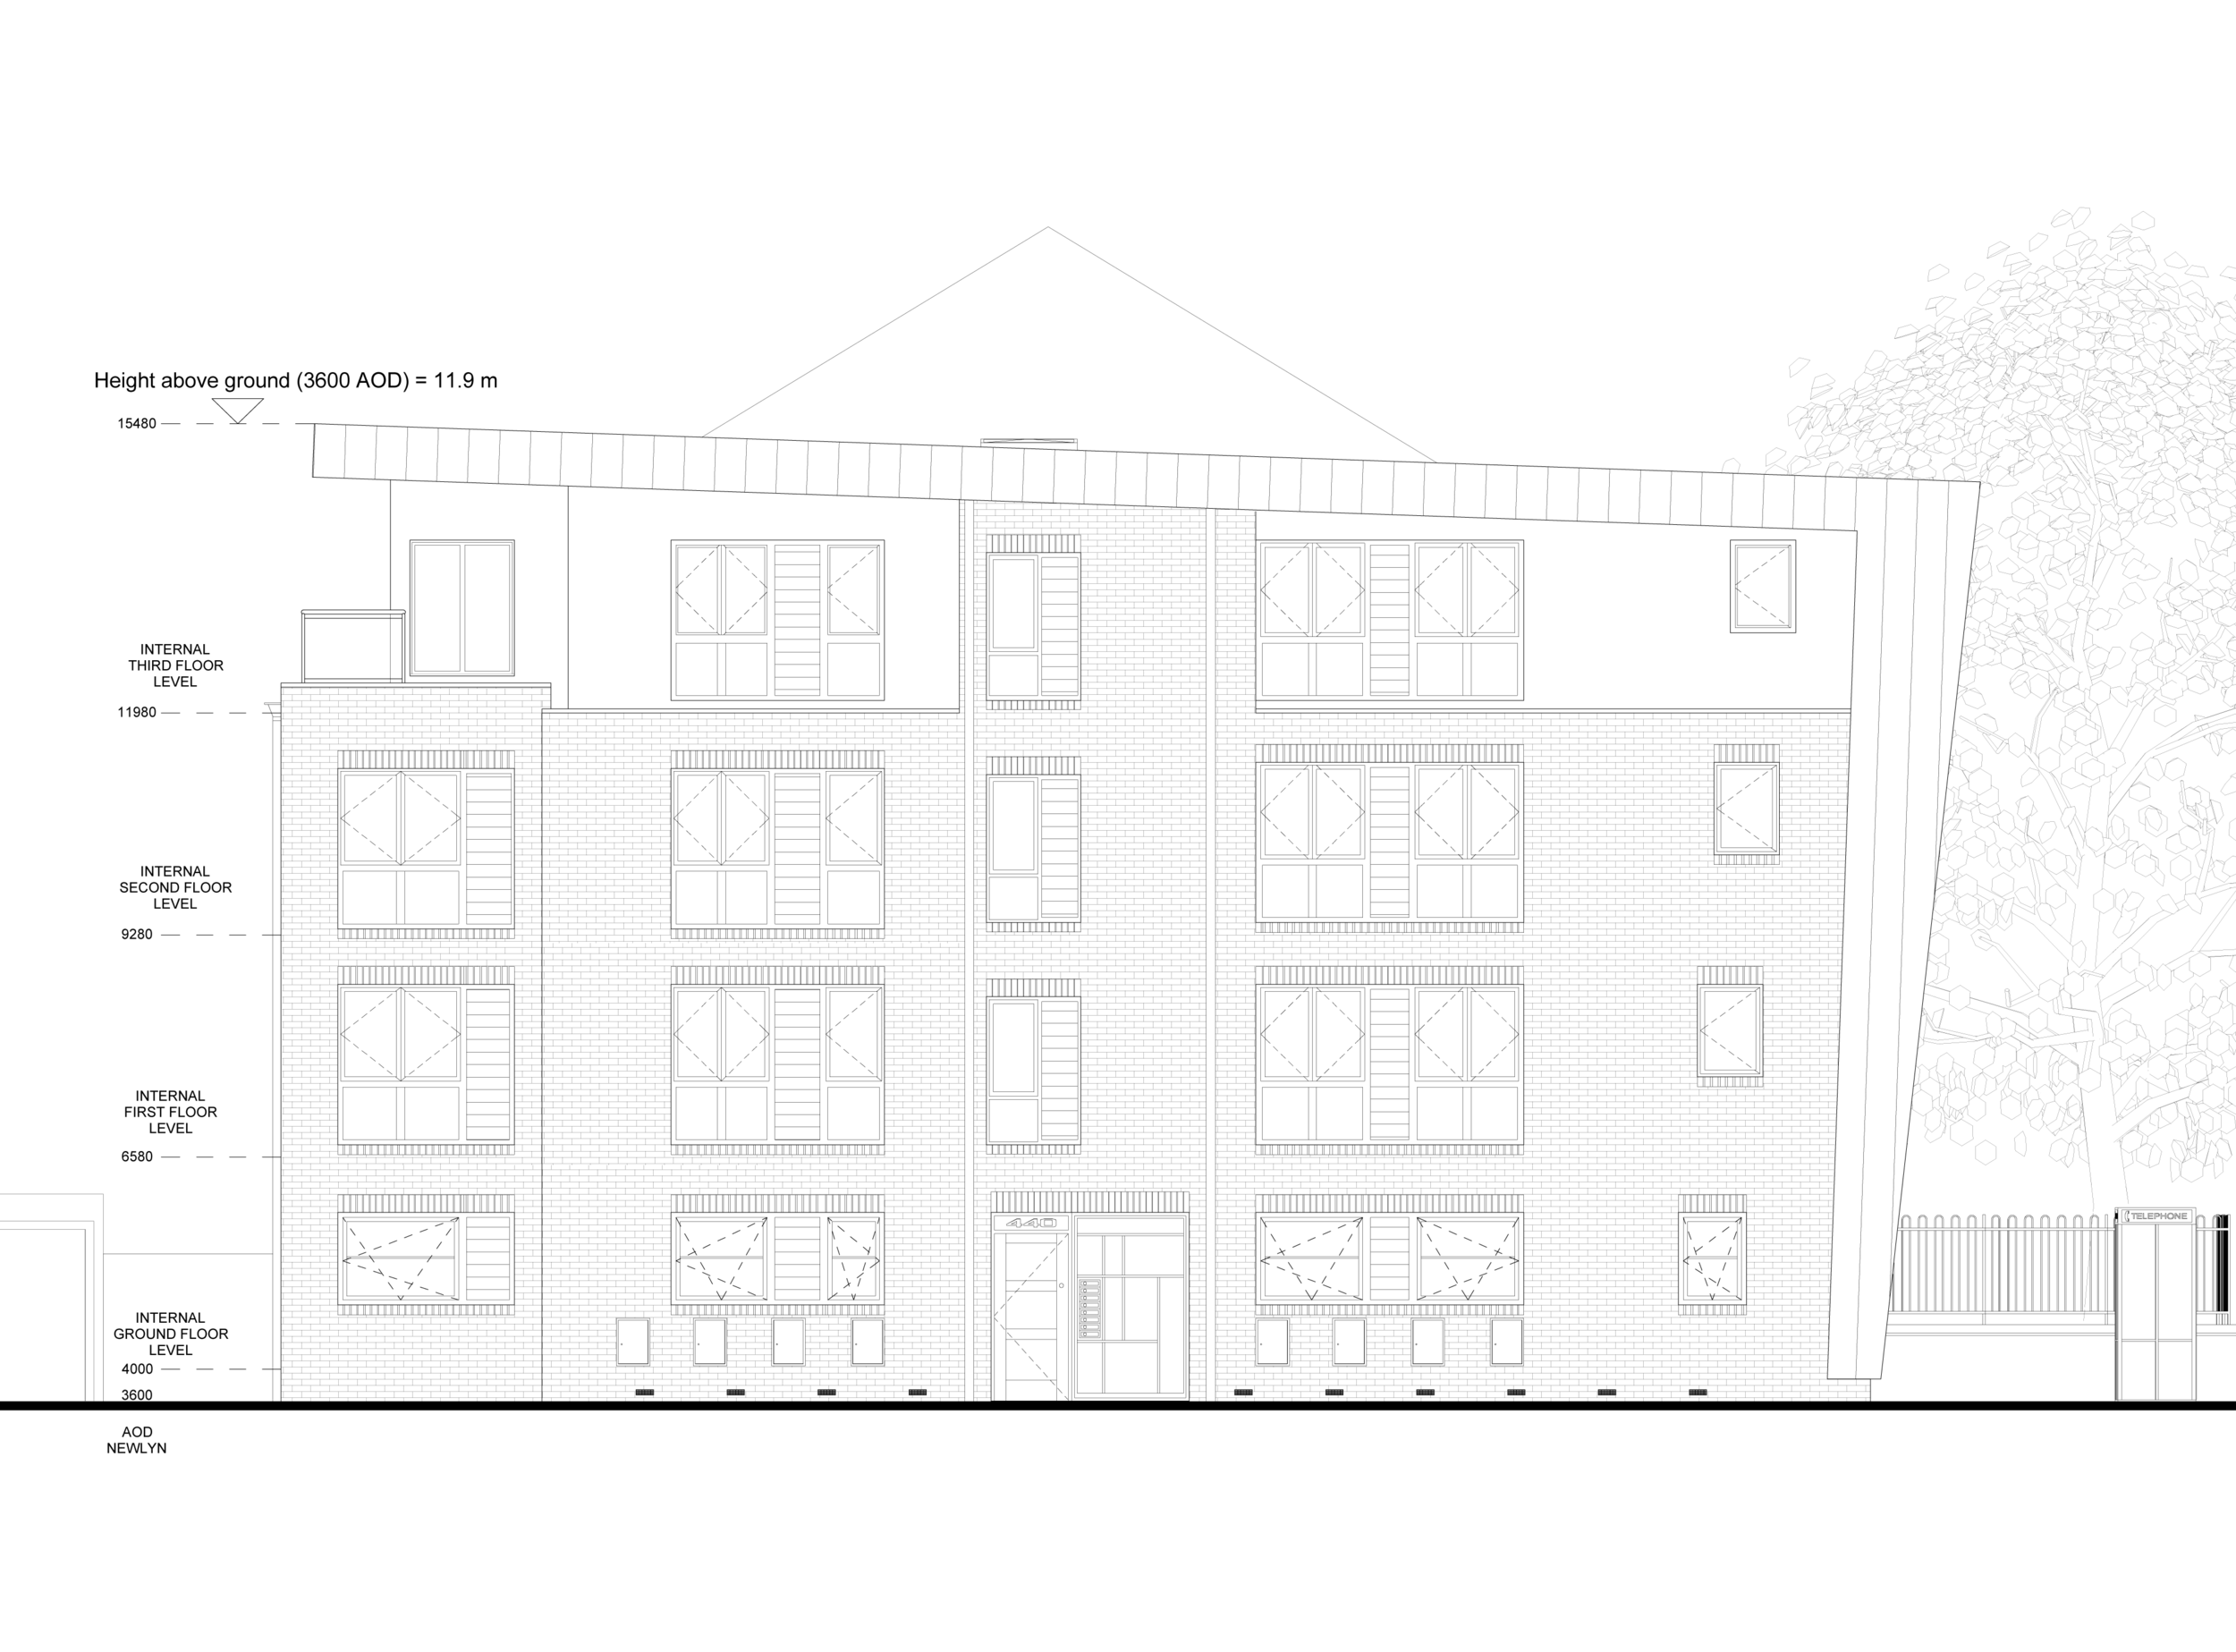 171020 Southwark Park Road-010G Proposed 3F Plan A2 (2).png